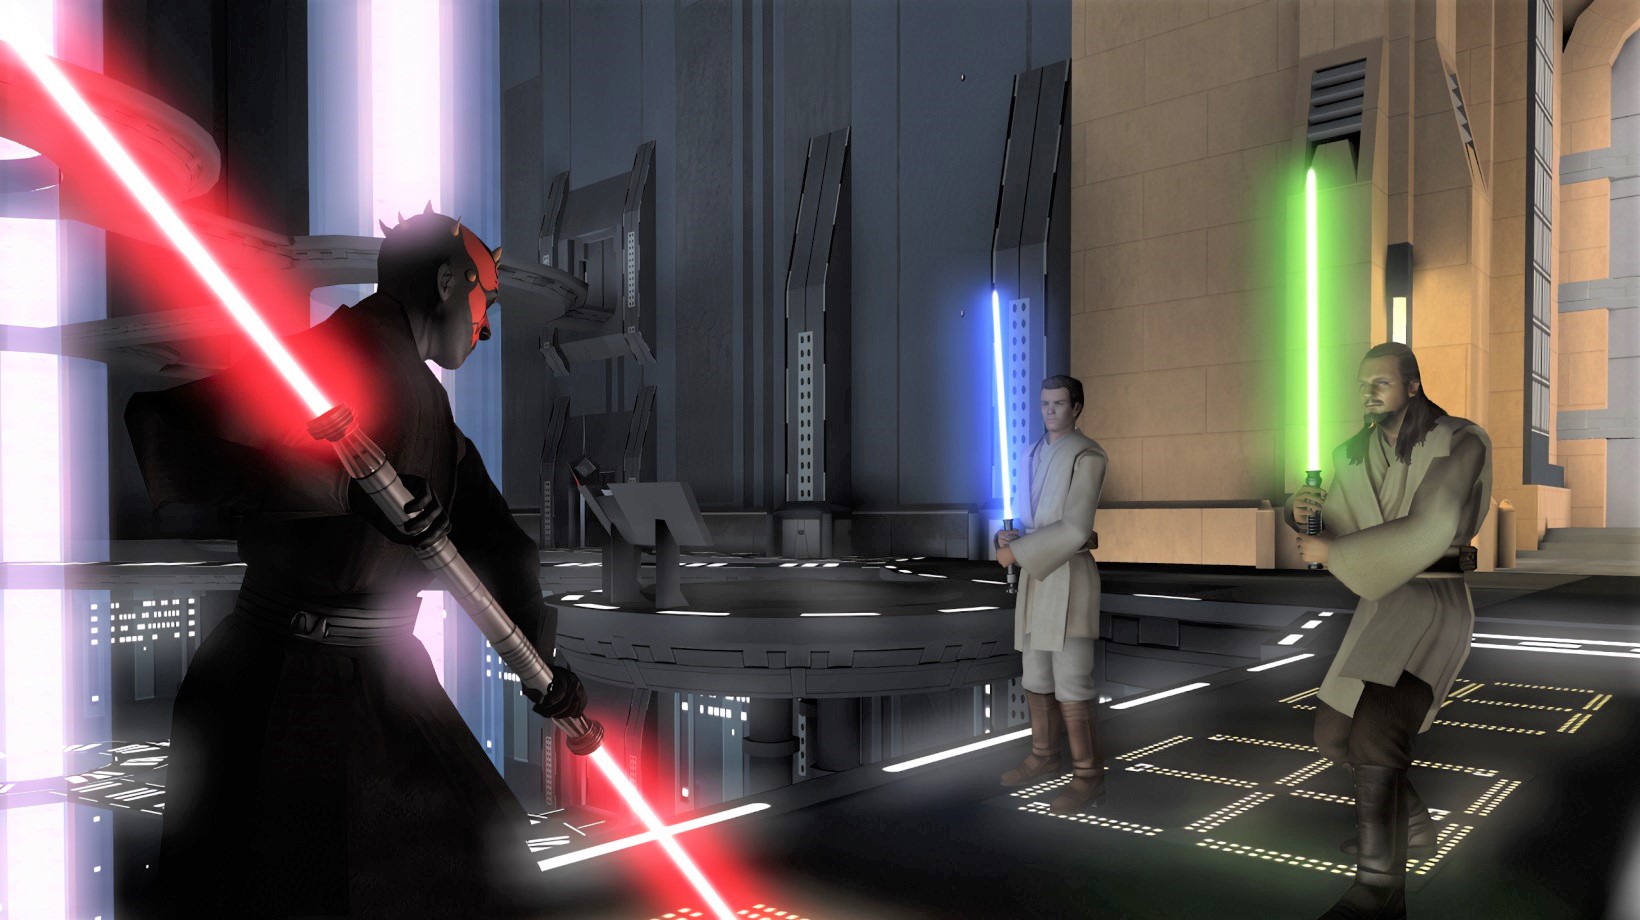 Are there any Star Wars games with lightsaber combat training modes?